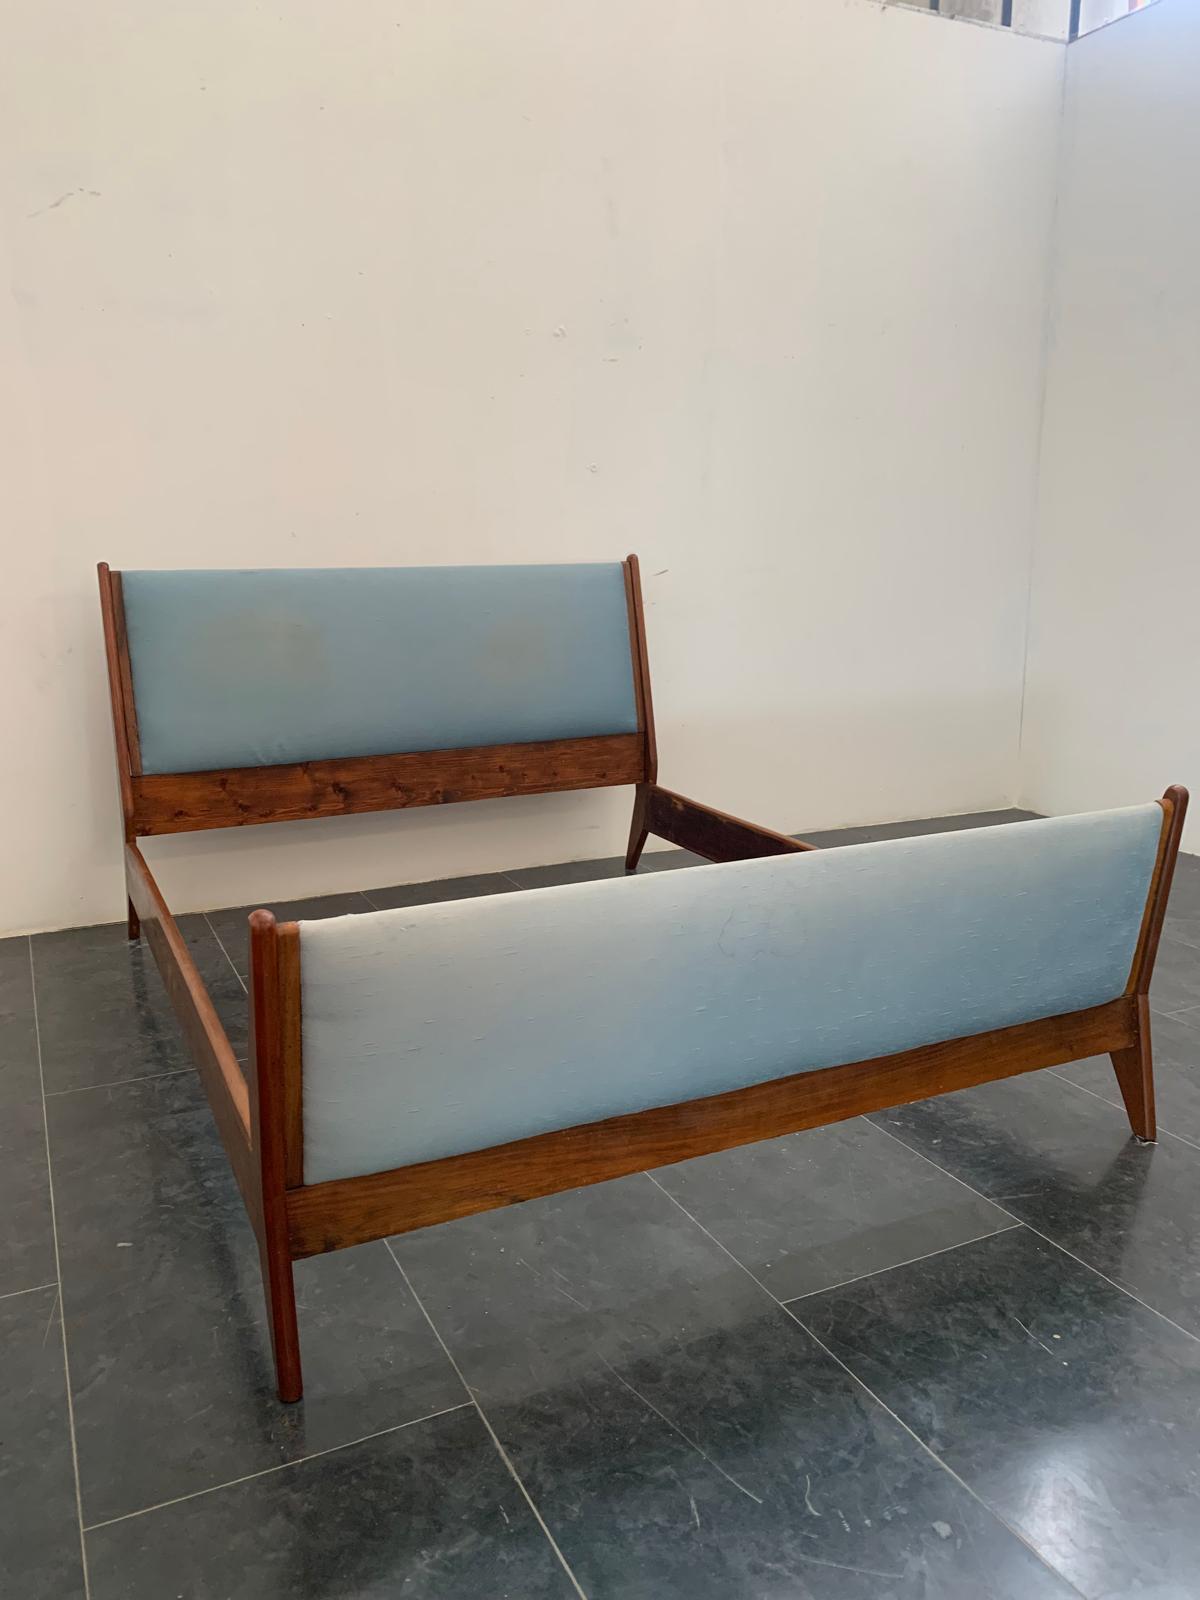 Italian Wooden Bed with Orthopedic Base by Ico & Luisa Parisi, 1960s For Sale